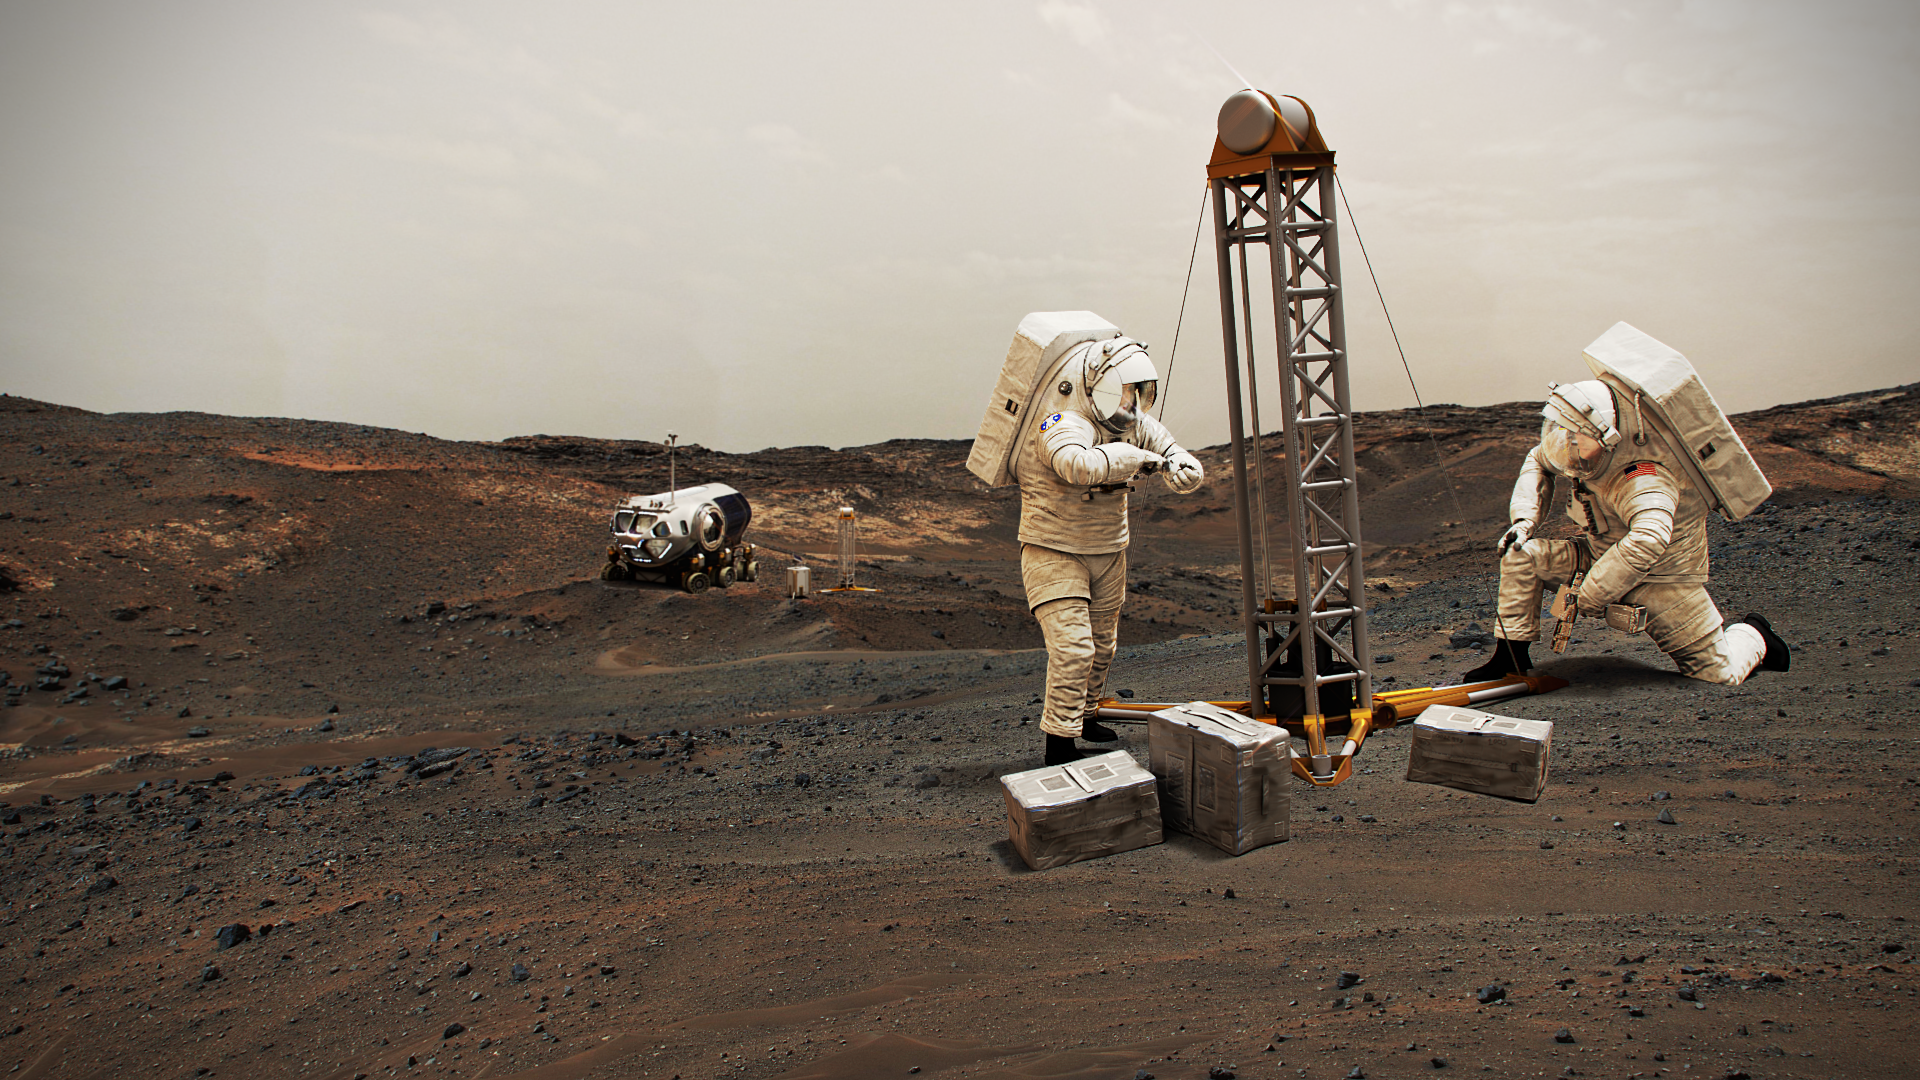 Astronauts working on a small drilling rig with a futuristic looking rover in the background, on Mars
